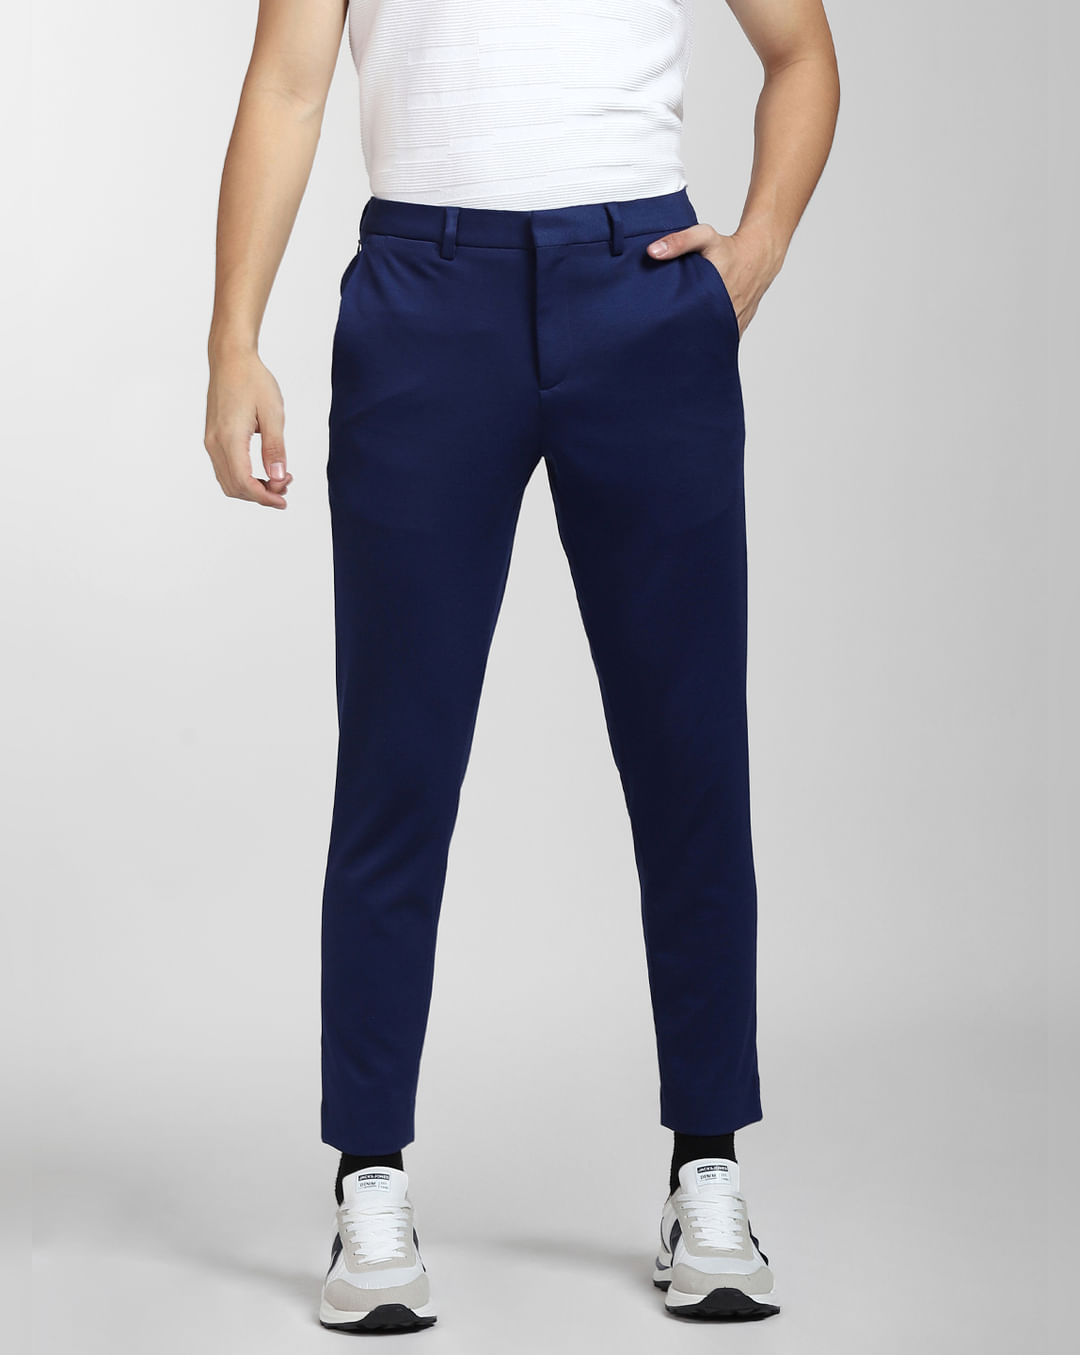 Royal Blue Mid Rise Slim Fit Trousers|105467201